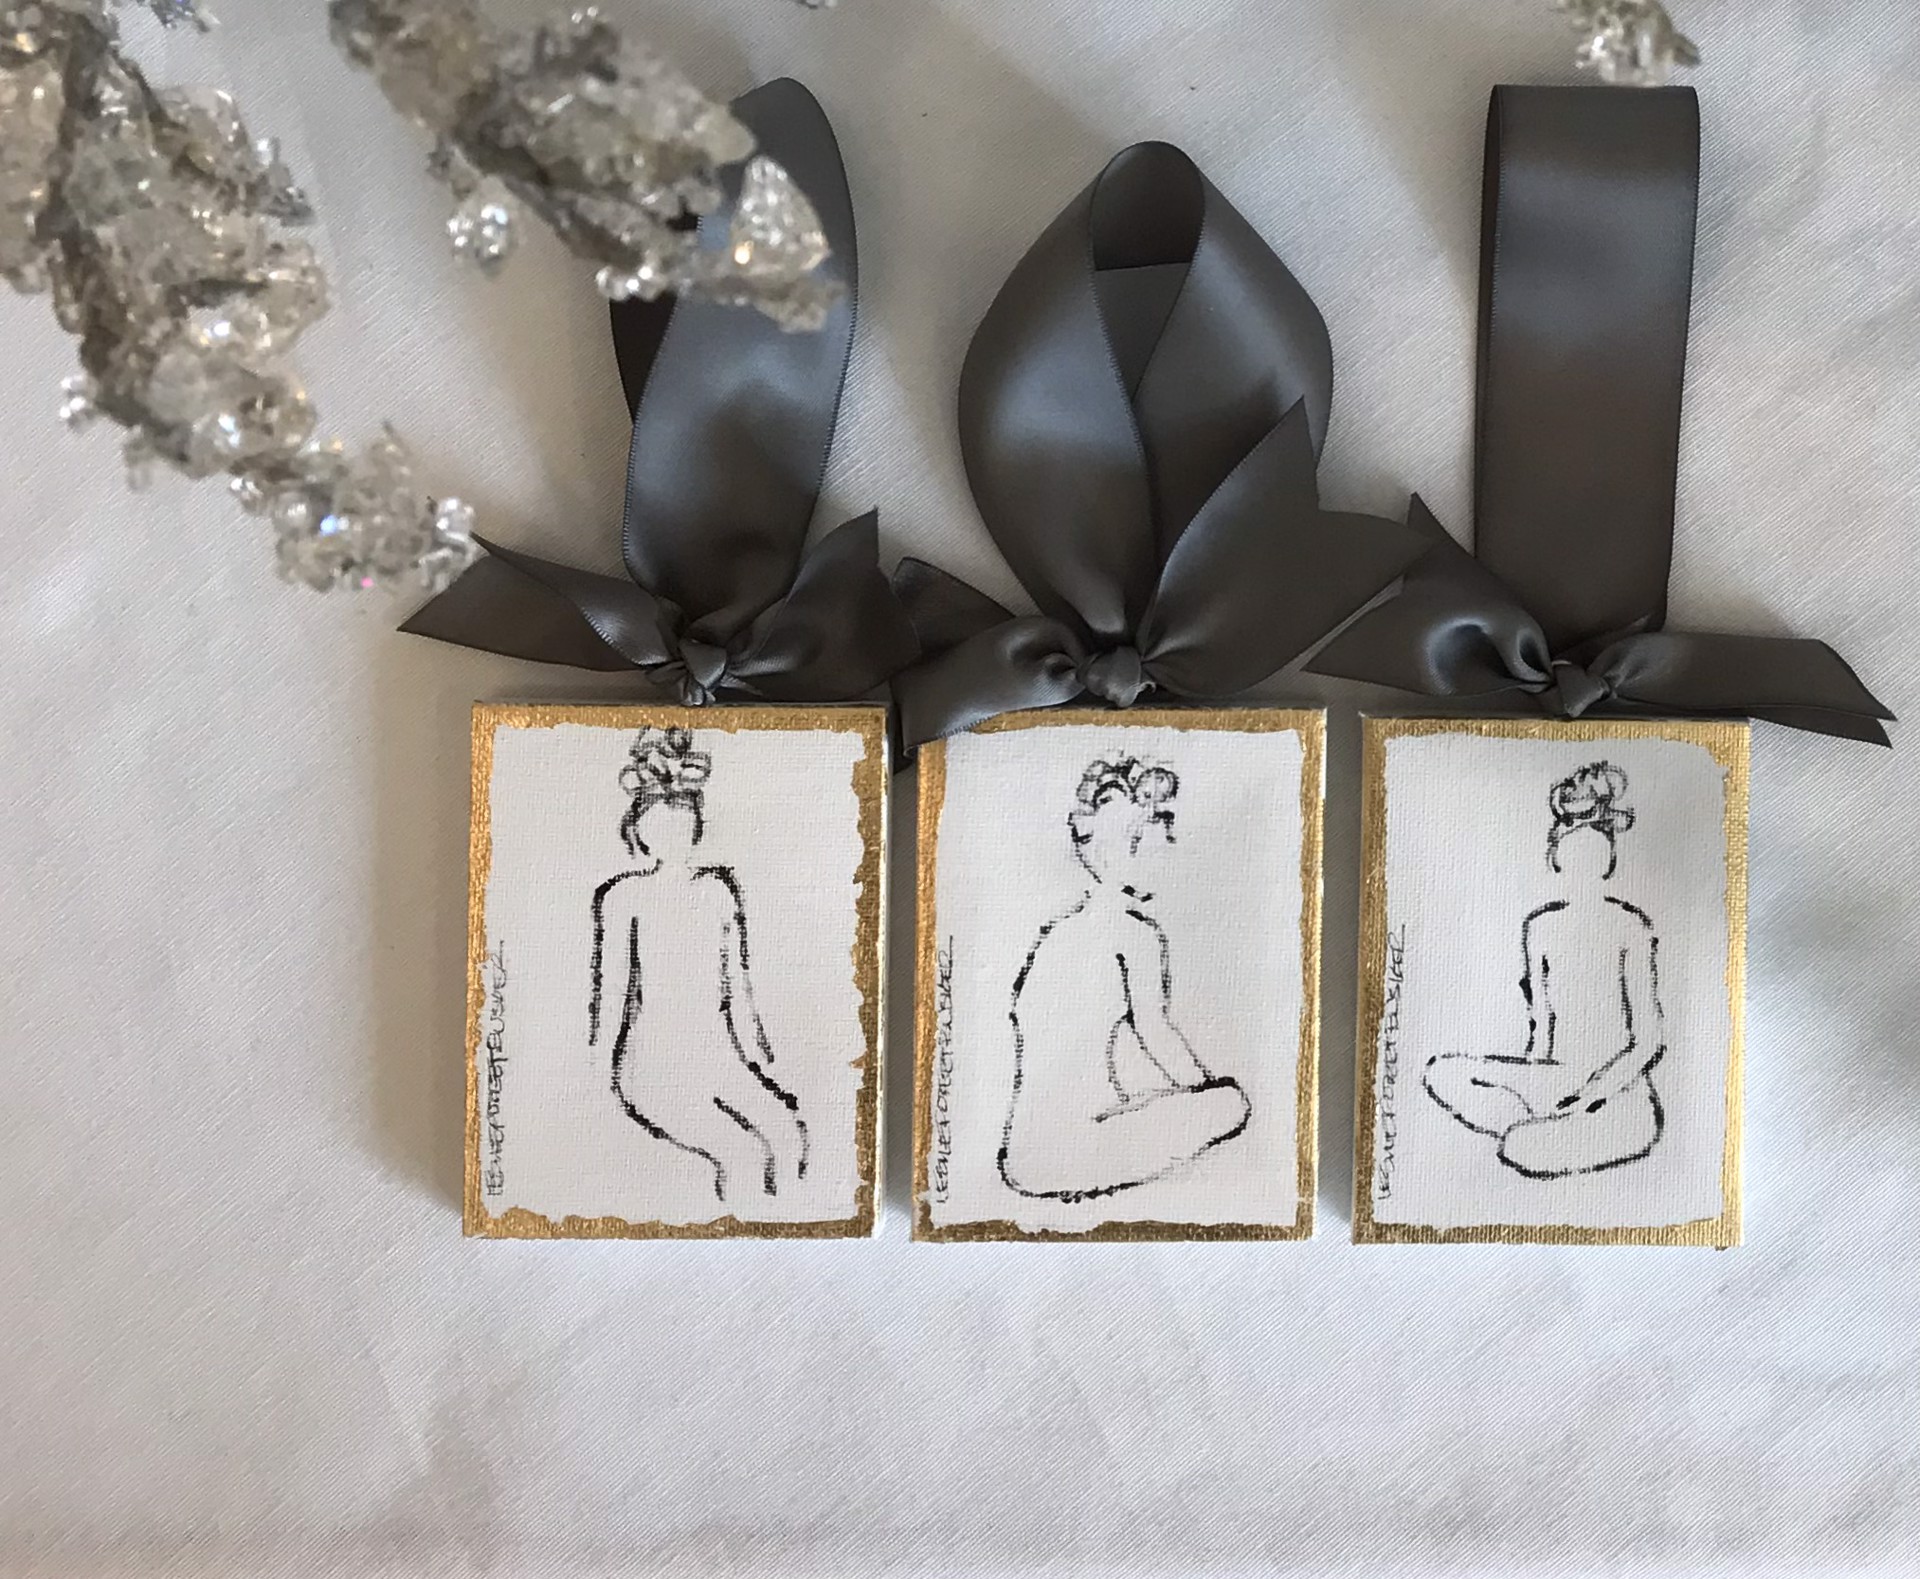 2021 Holiday Figure Ornaments, Set of Three, Group 1 by Leslie Poteet Busker